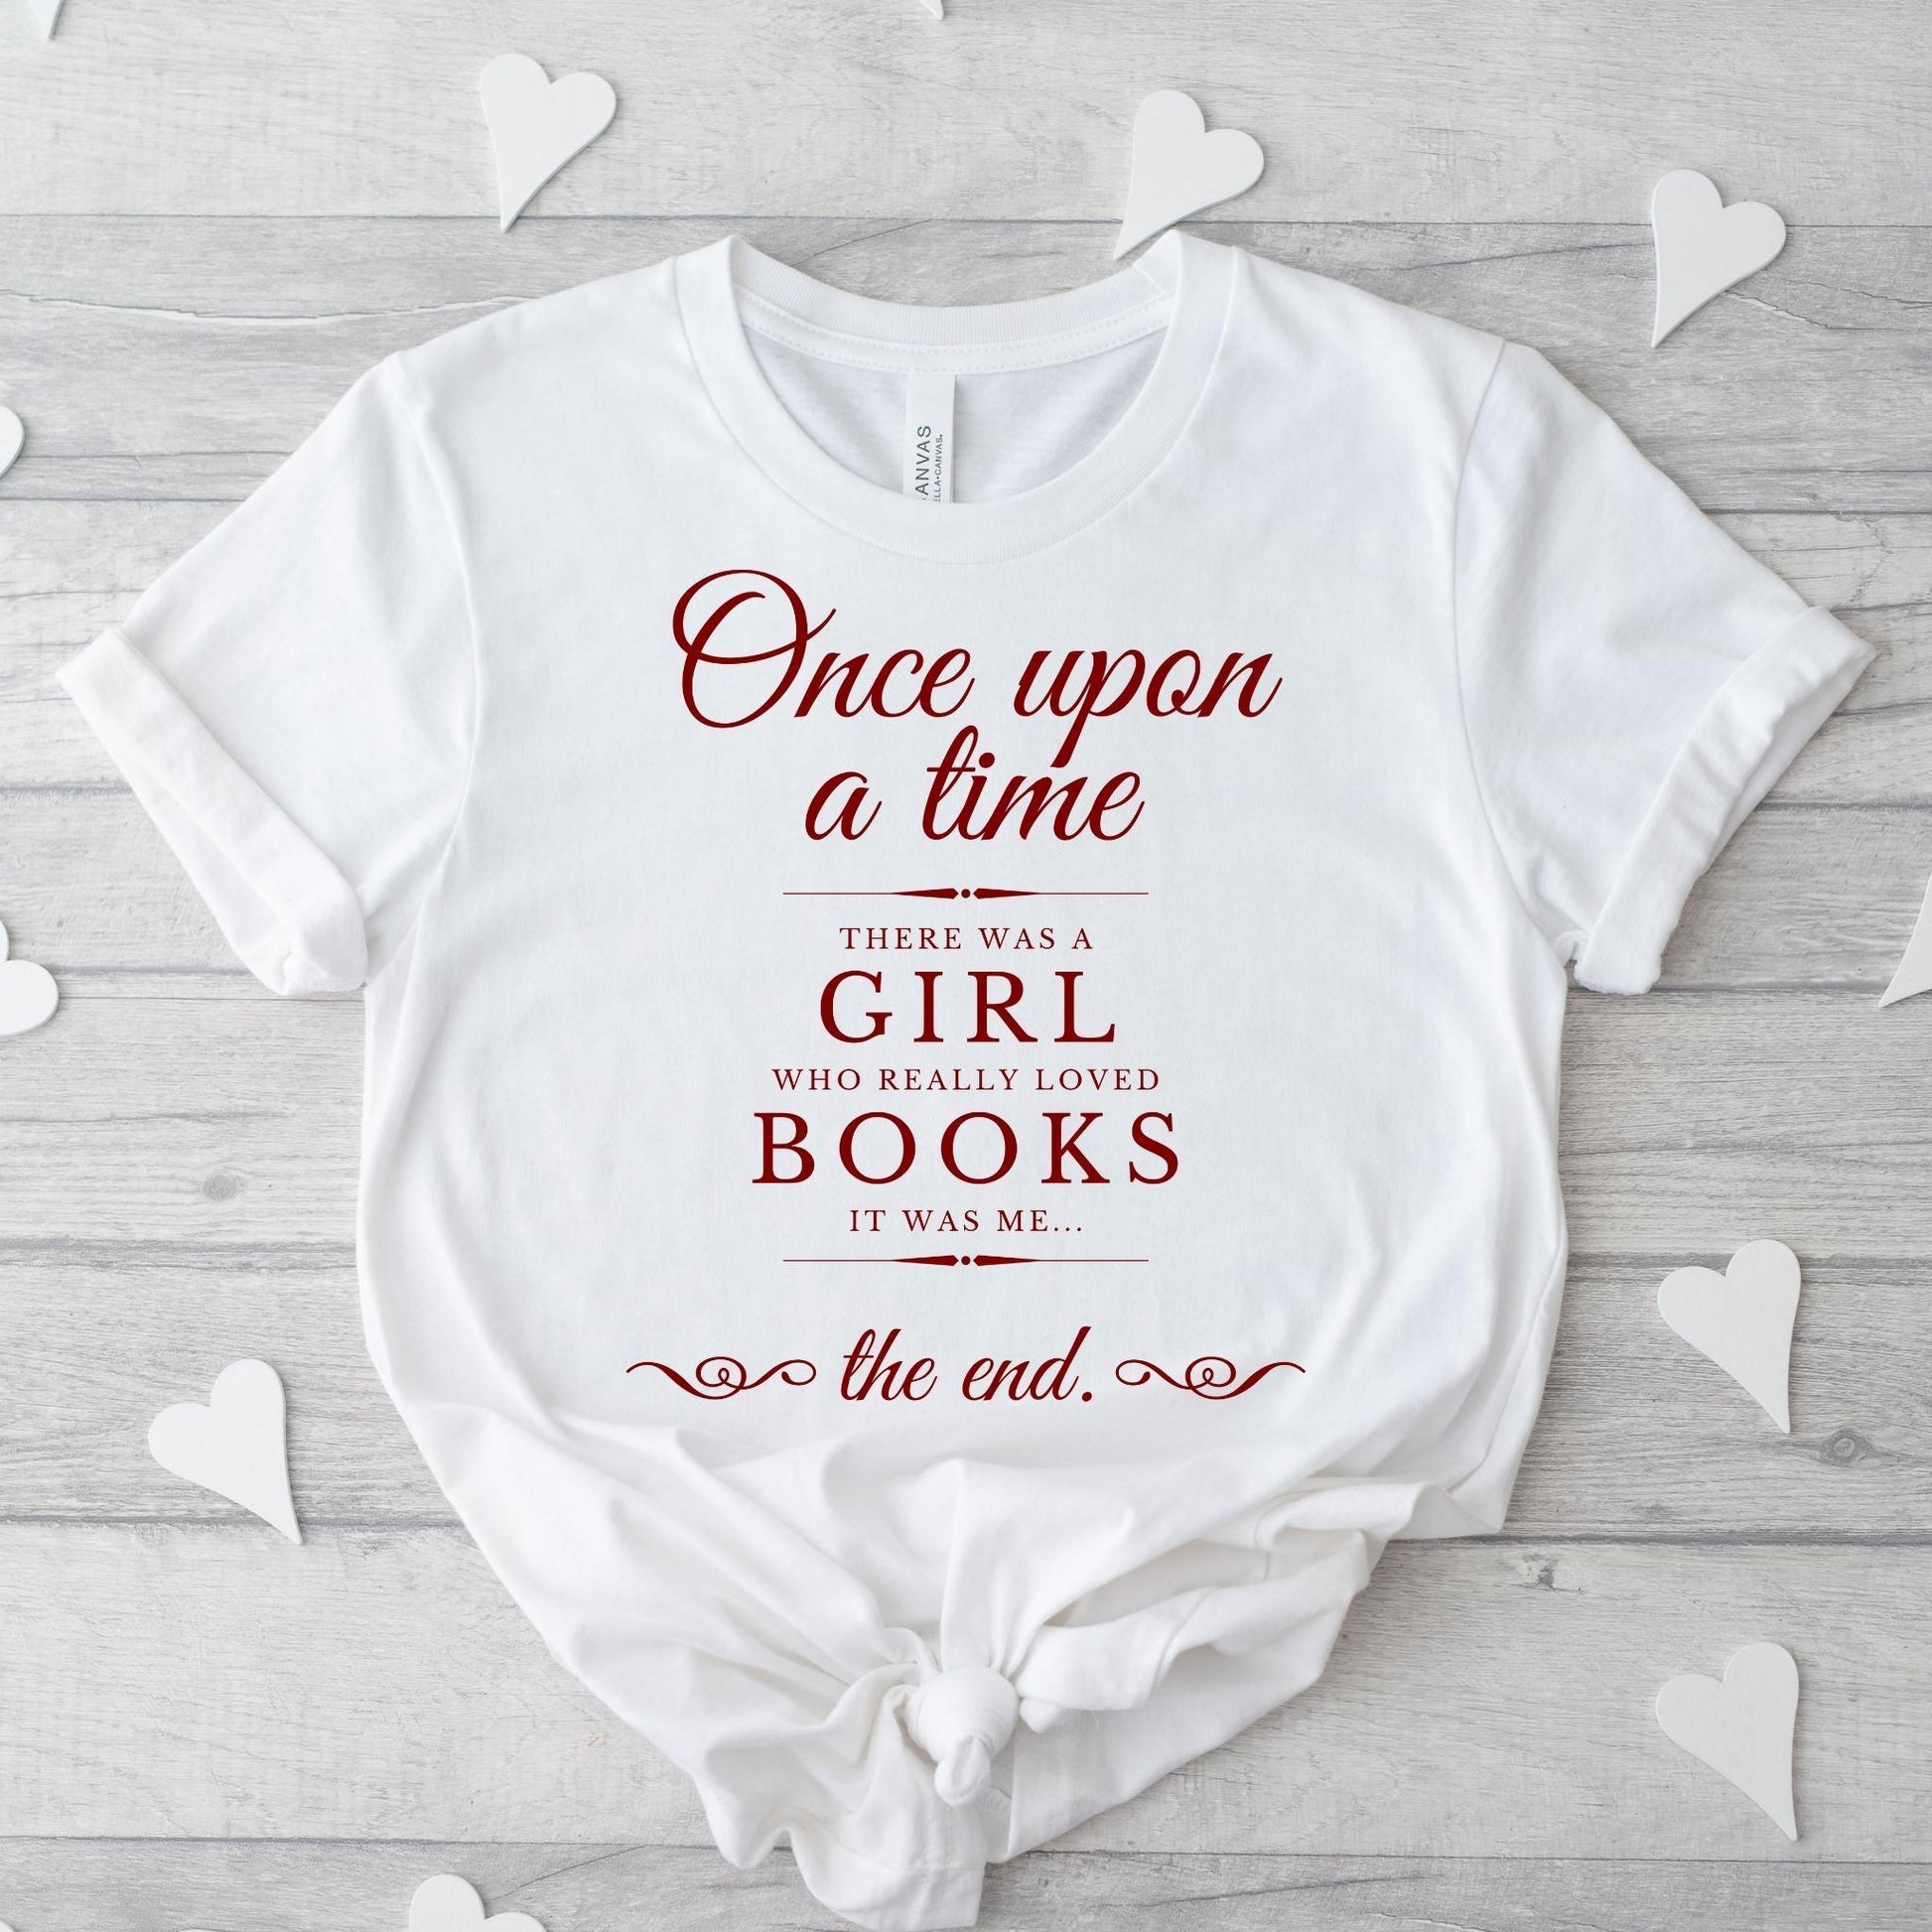 Once Upon A Time... - Unisex T-Shirt - WellReadBabes